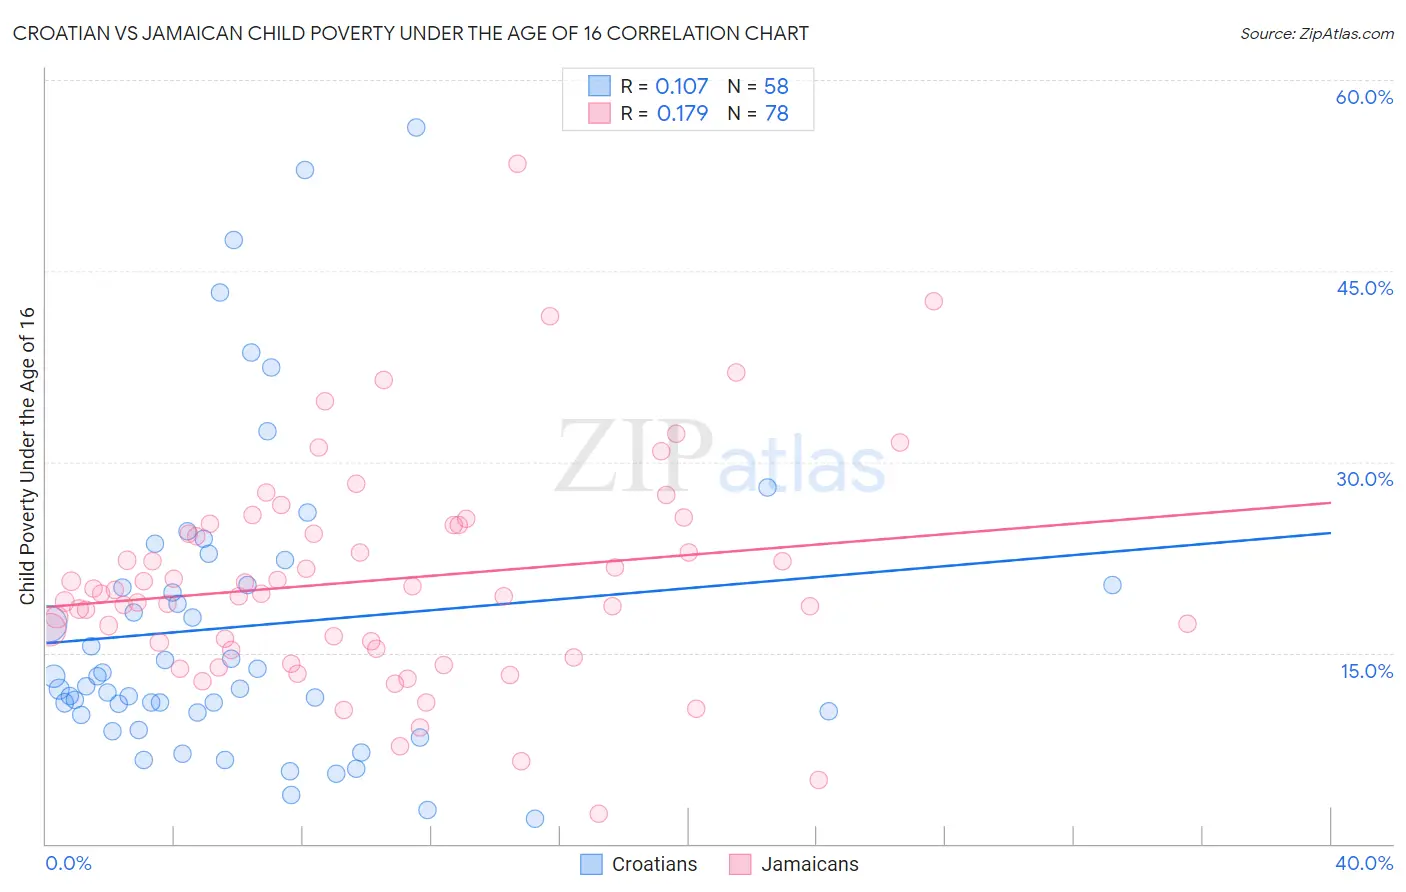 Croatian vs Jamaican Child Poverty Under the Age of 16